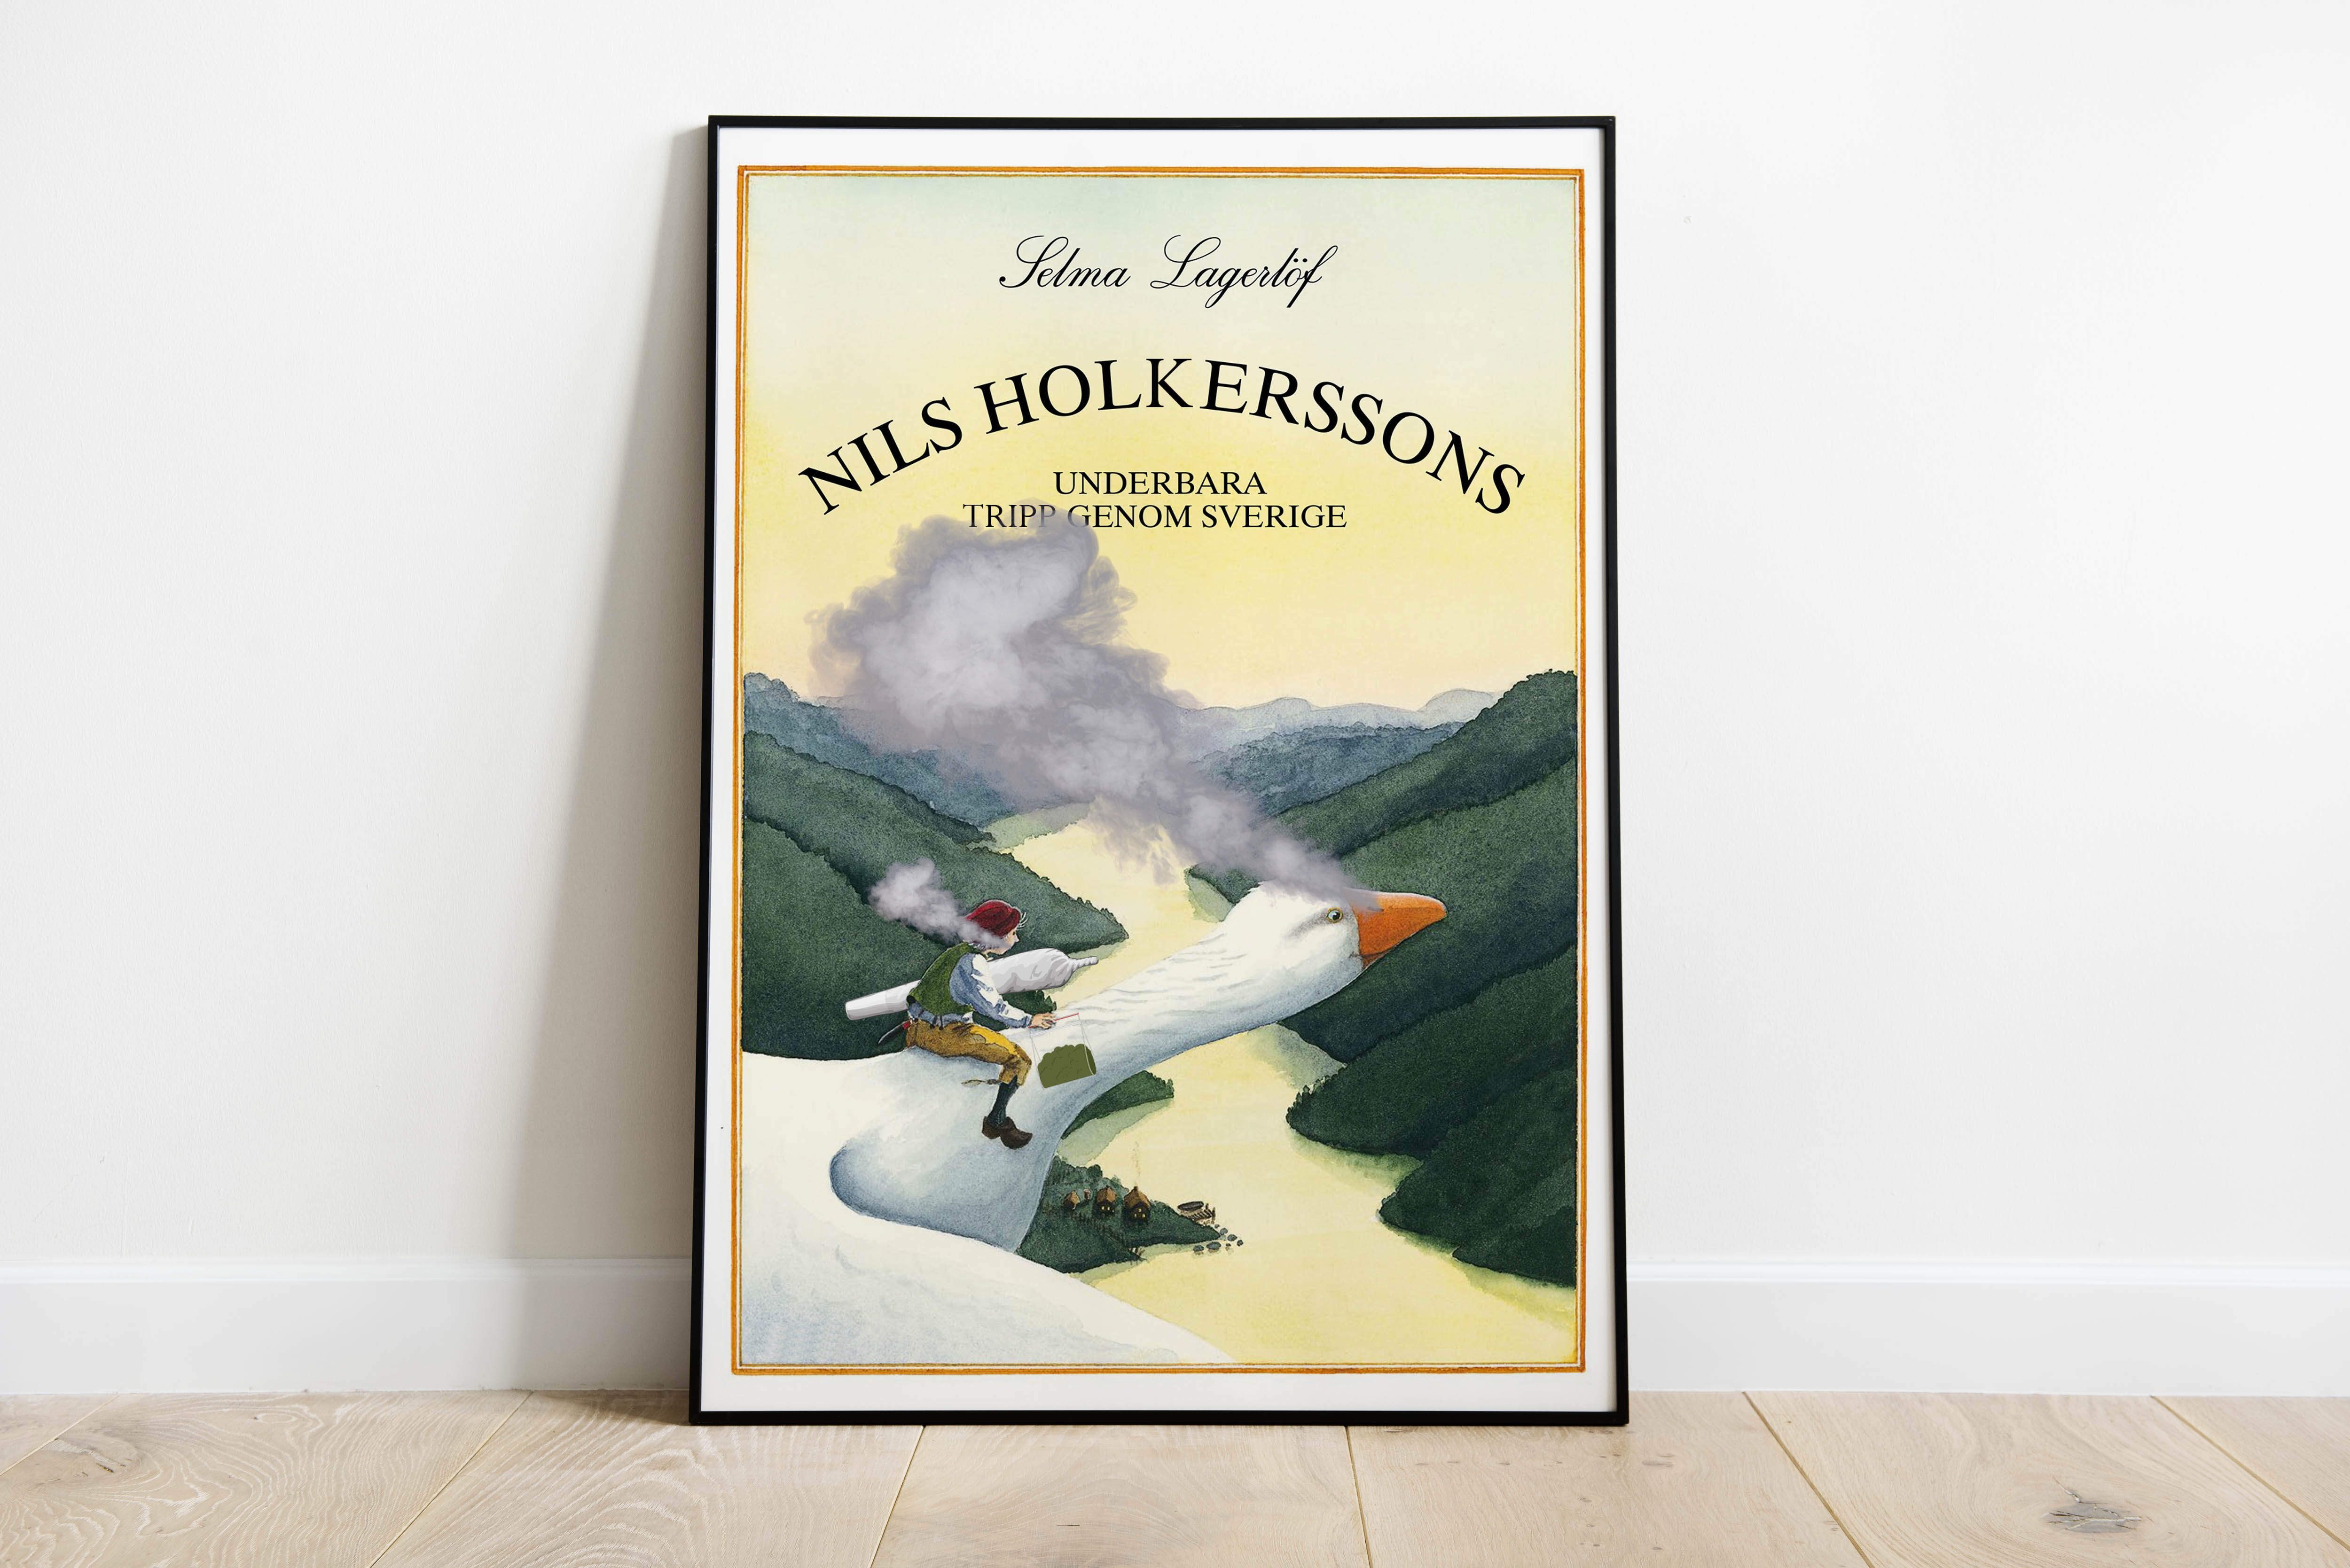 "Nils Holkersson"